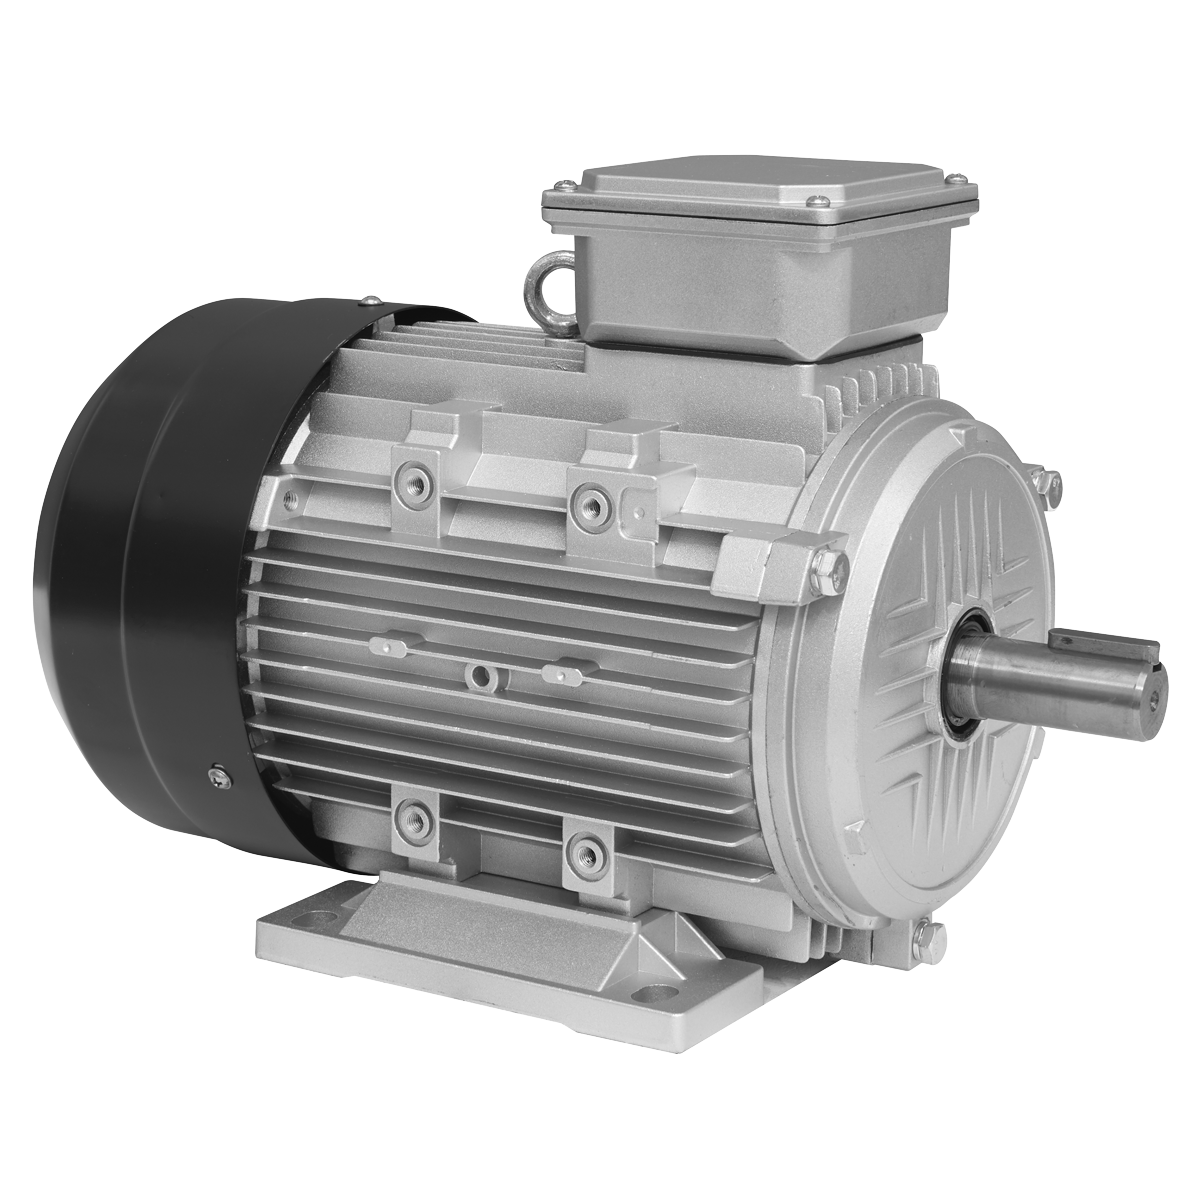 Air compressor Electrical Motor 5.5hp 4kw